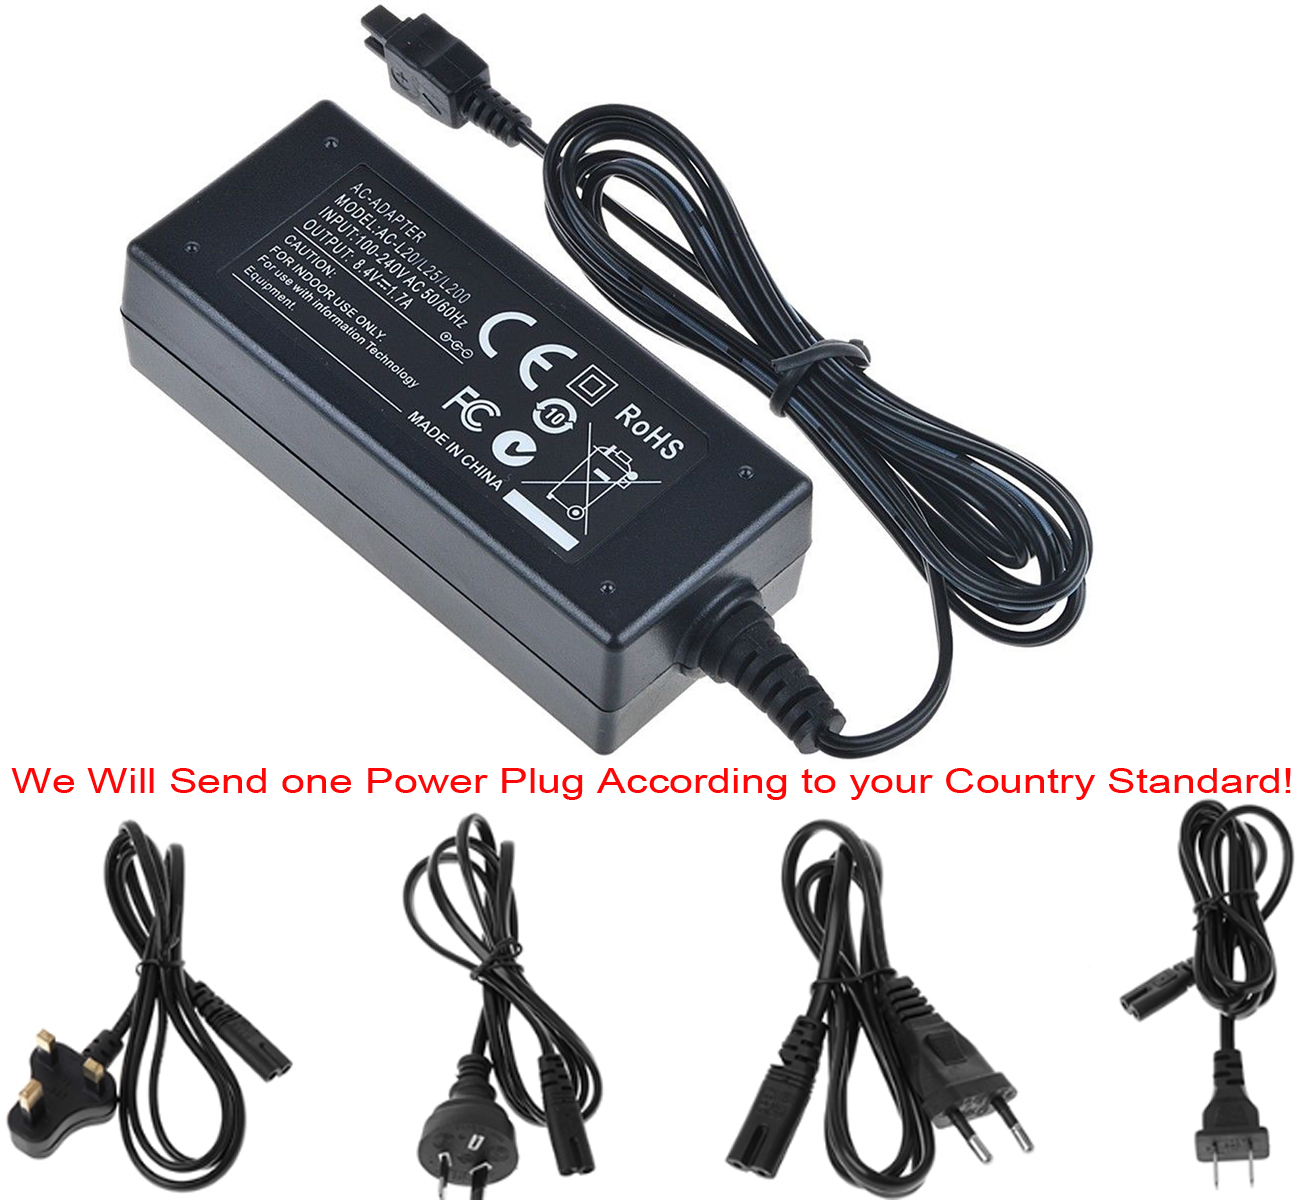 Ac Power Adapter Oplader Voor Sony HDR-CX400E, HDR-CX410VE, HDR-CX420E, HDR-CX430VE Handycam Camcorder